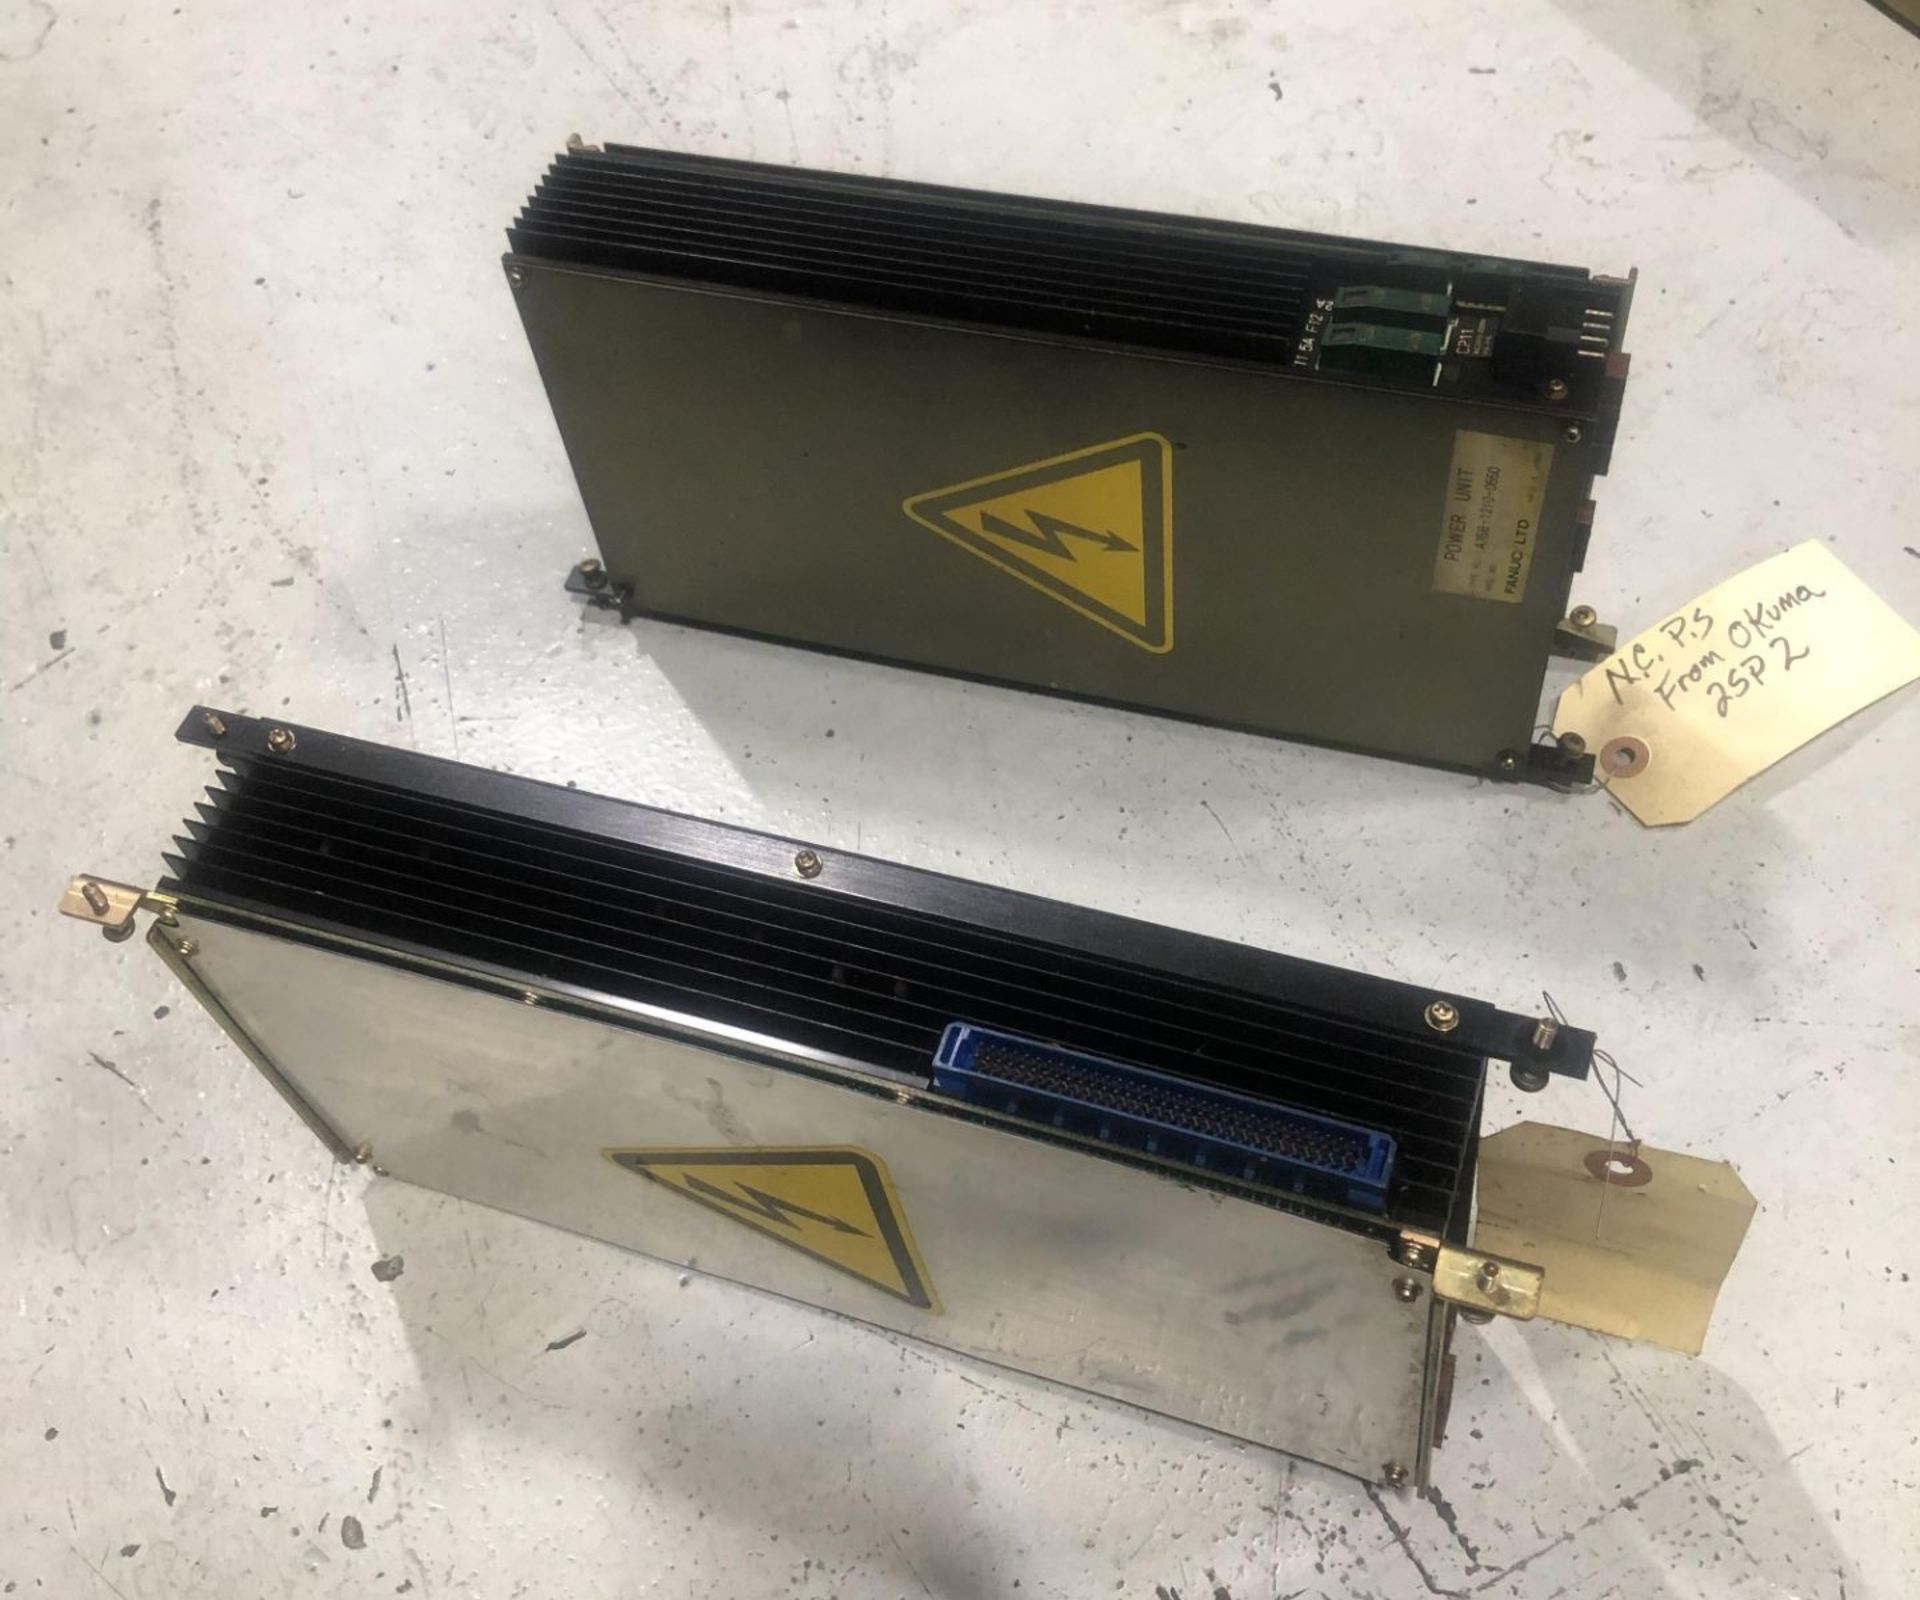 LOT OF 2 Fanuc Power Supplies, A16B-1210-0660 & A16B-1211-0850 - Image 2 of 8